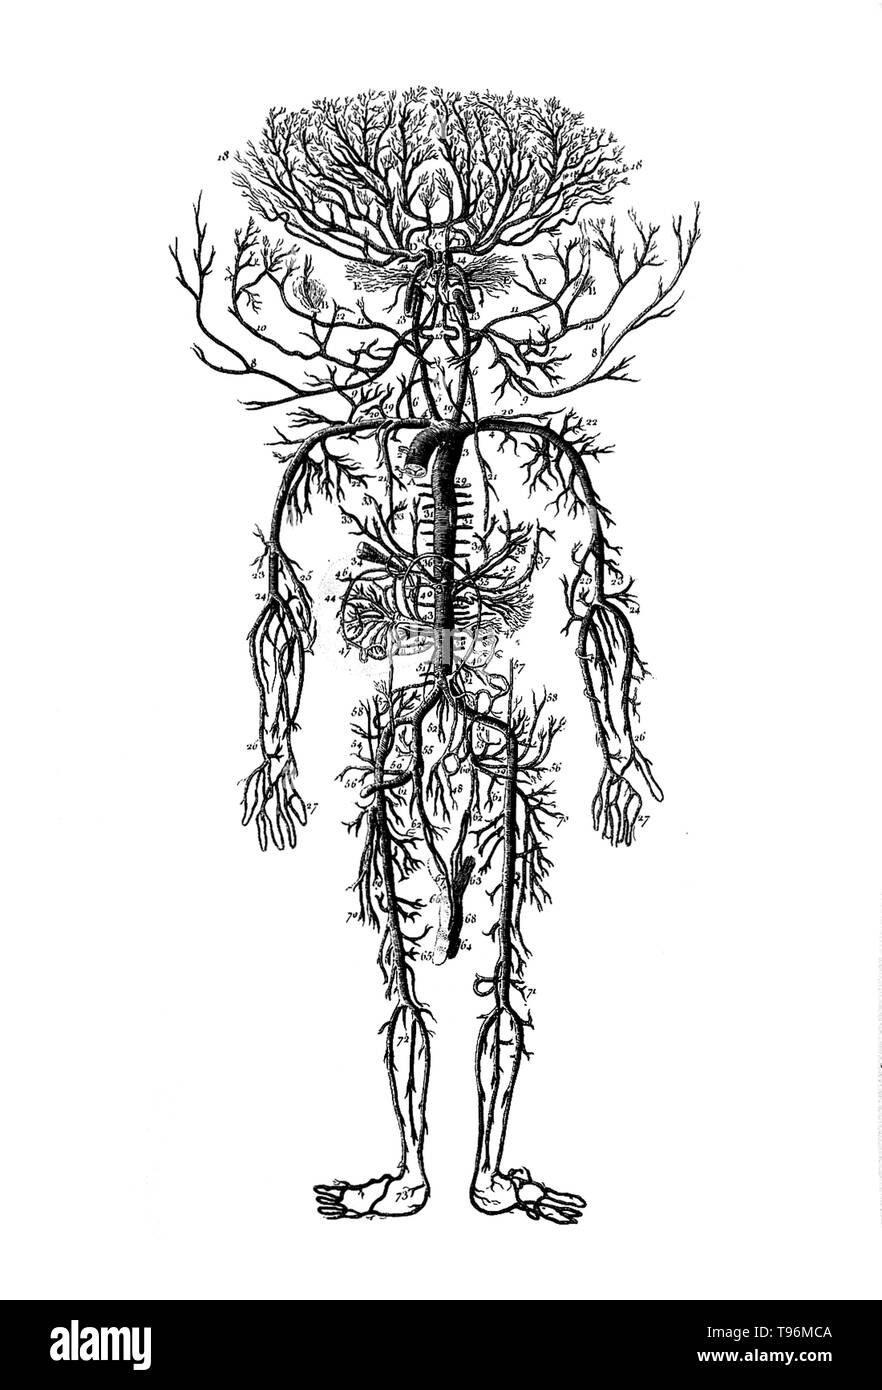 Arteries are blood vessels that takes blood away from the heart to all parts of the body. William Harvey described and popularized the modern concept of the circulatory system and the roles of arteries and veins in the 17th century. Stock Photo